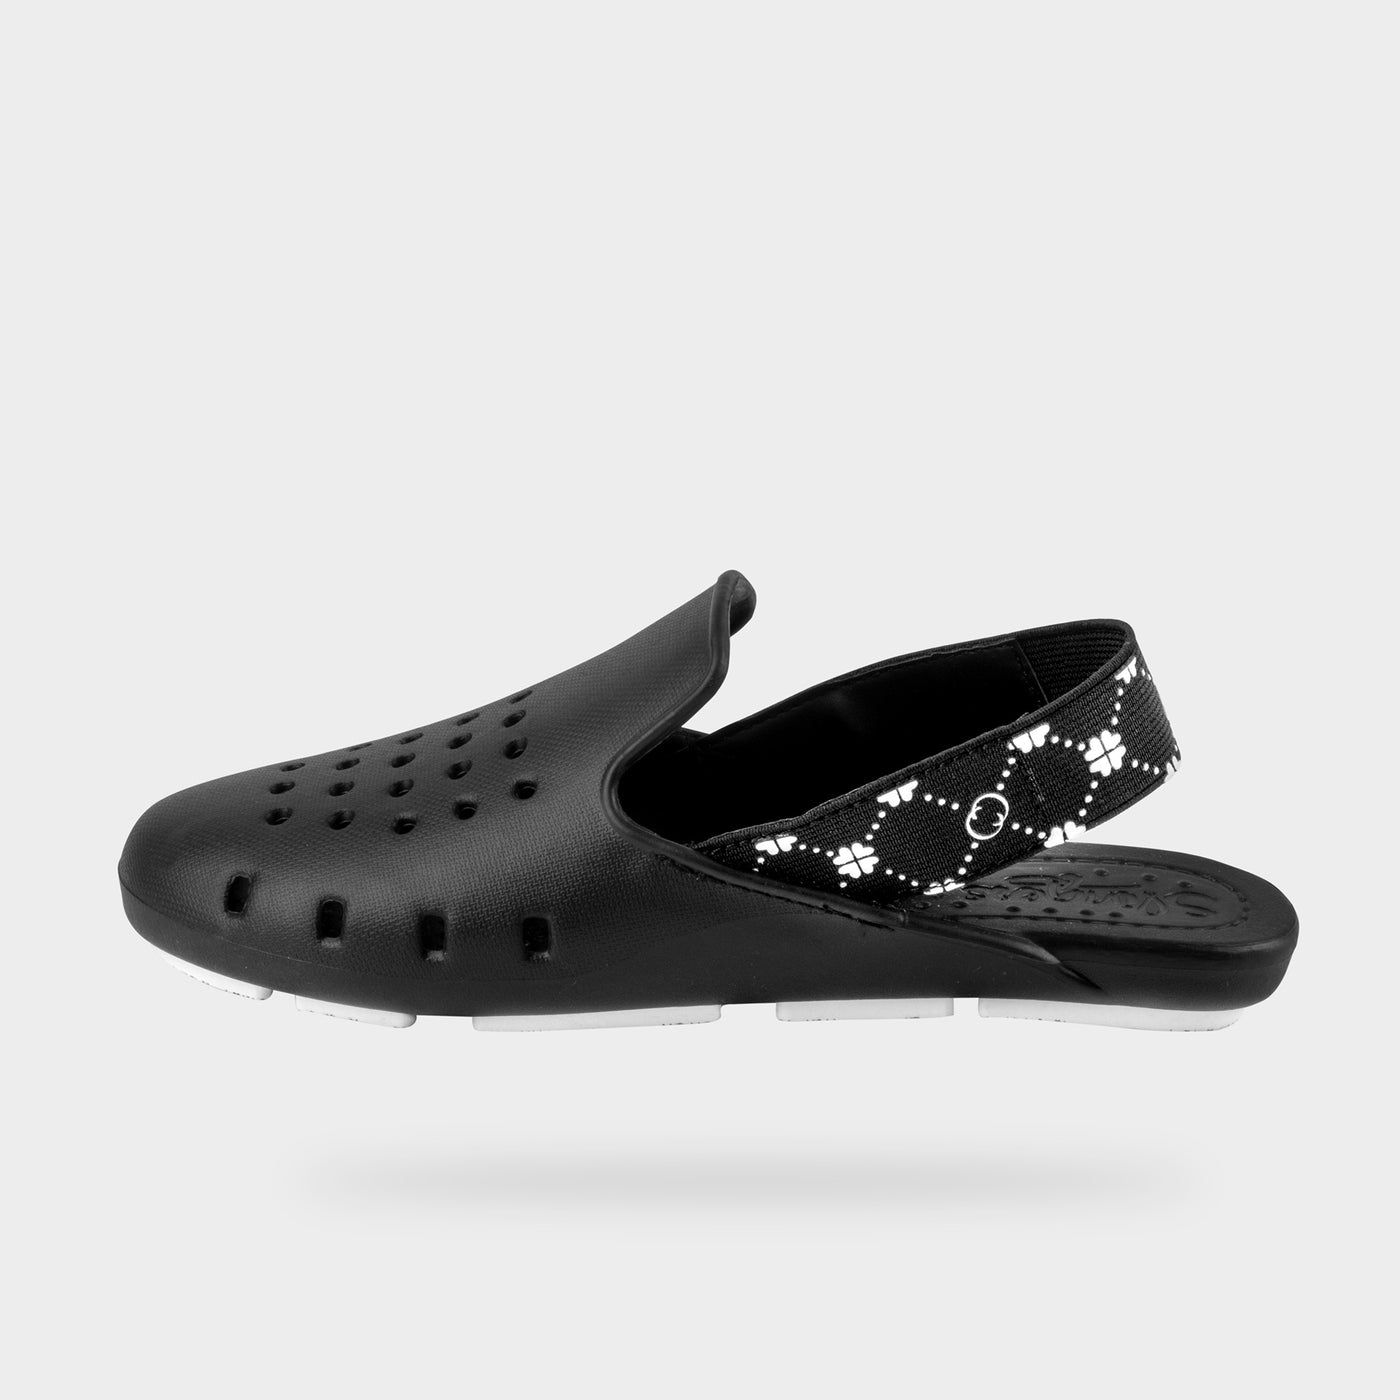 Water shoe for kids in black, with ventilation and elastic strap for support